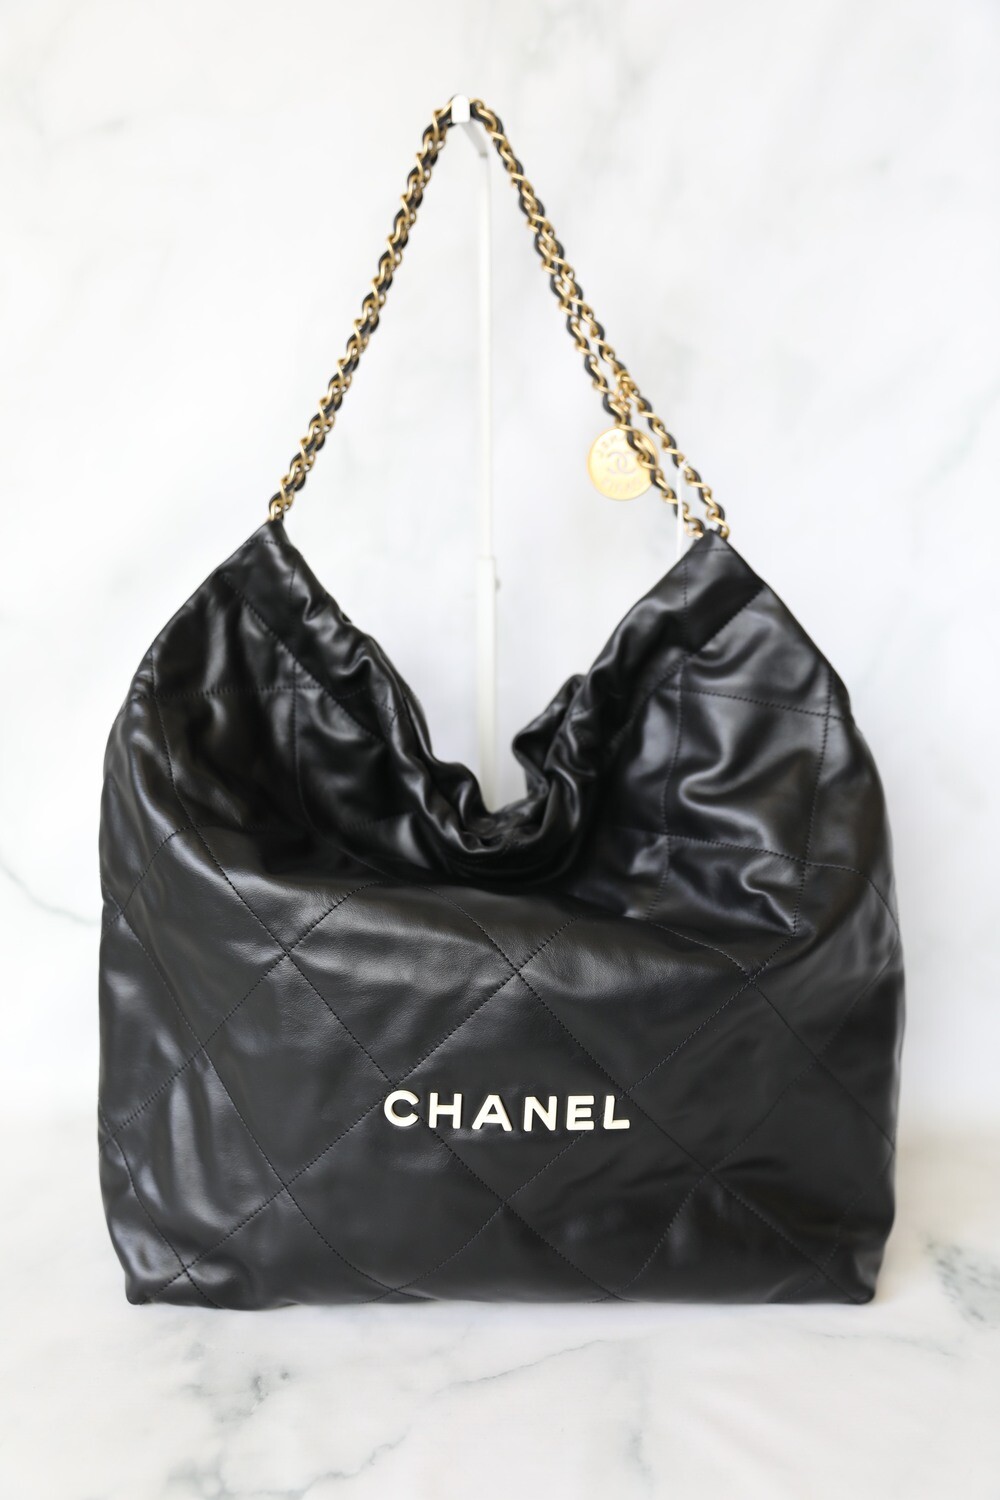 Chanel Cruise 2022 Classic Bag Collection